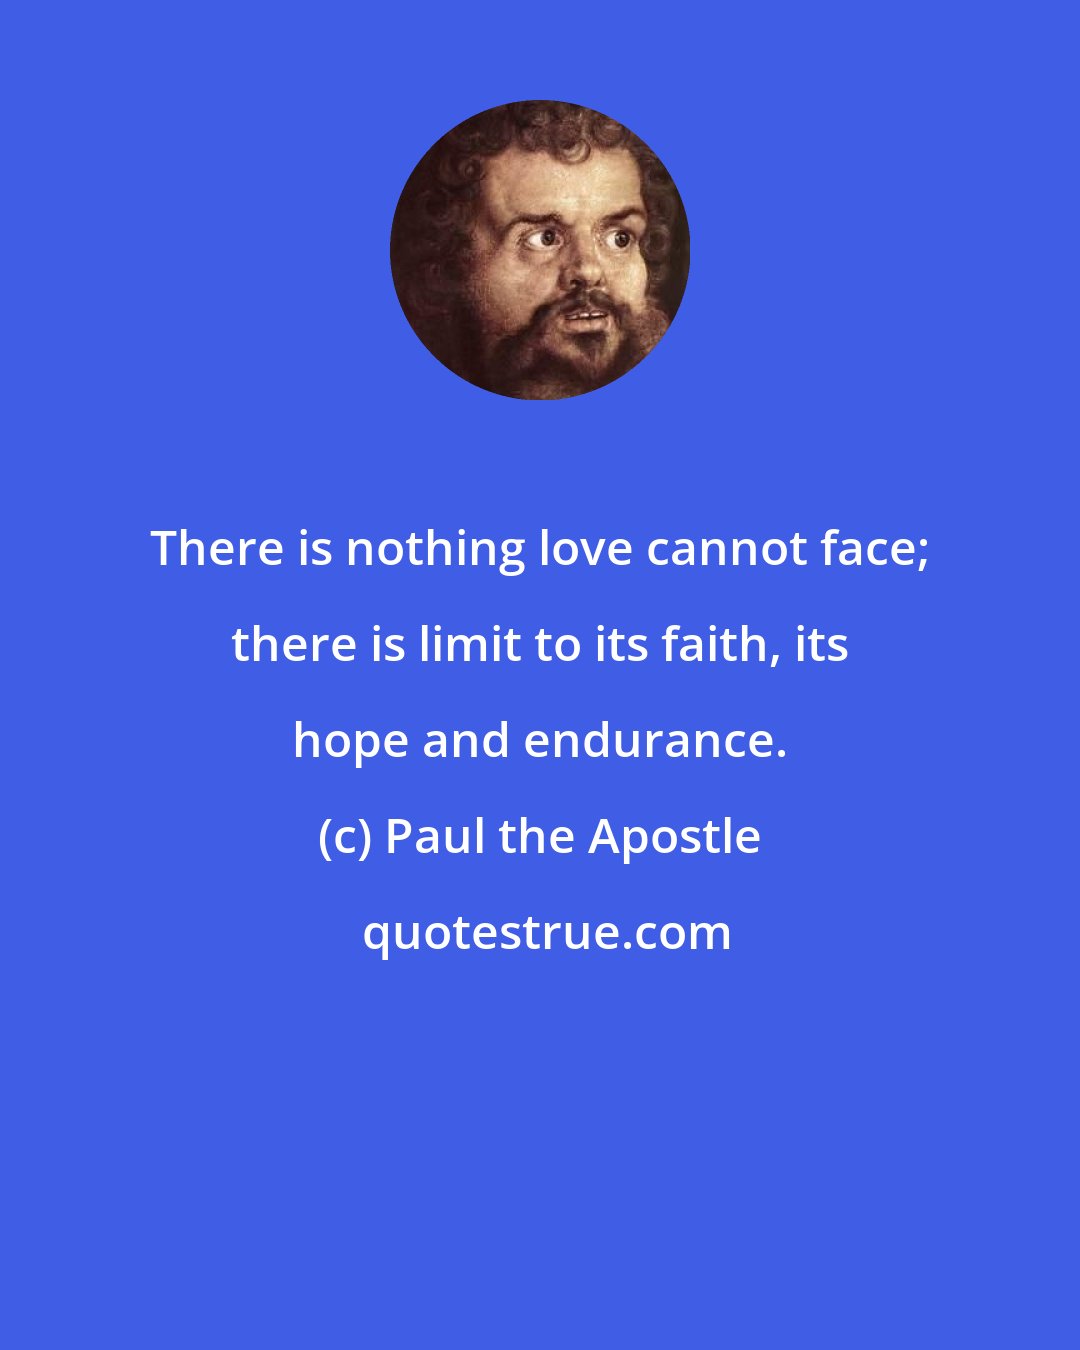 Paul the Apostle: There is nothing love cannot face; there is limit to its faith, its hope and endurance.